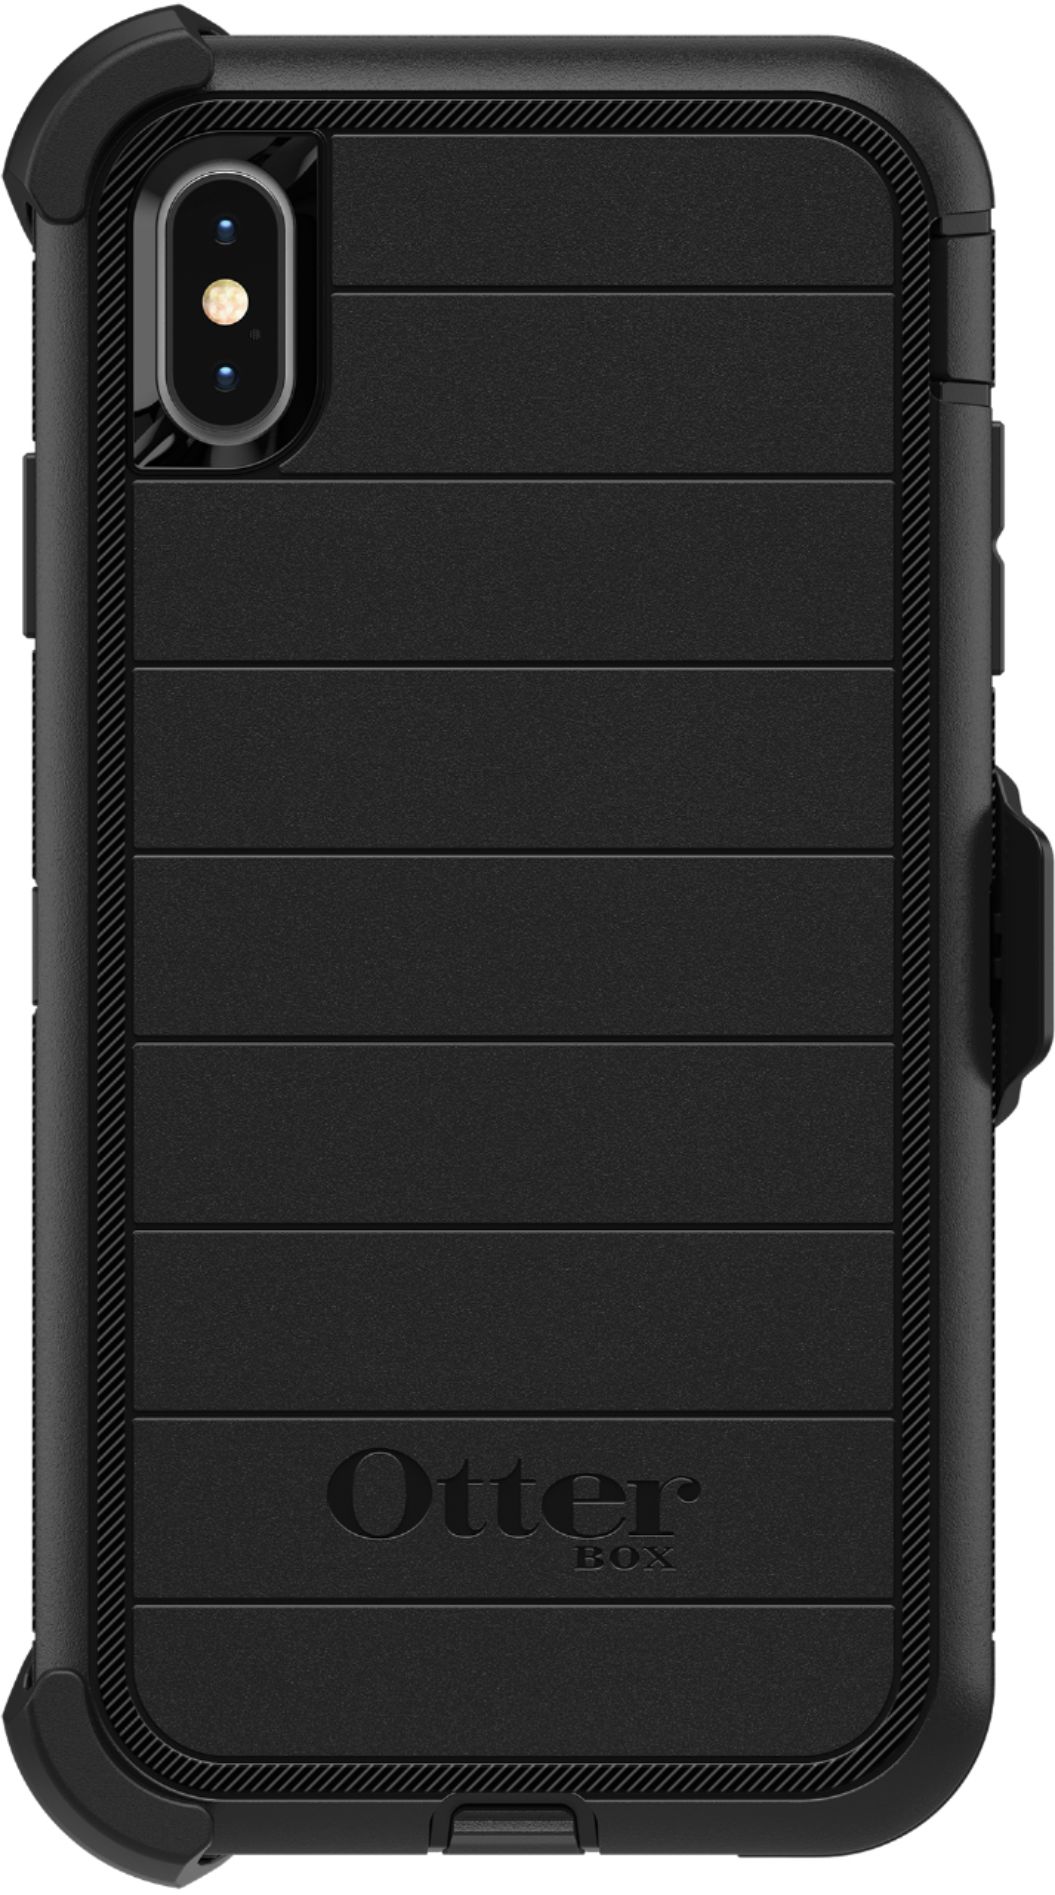 Otterbox Defender Series Pro Case For Apple Iphone Xs Max Black 518bbr Best Buy